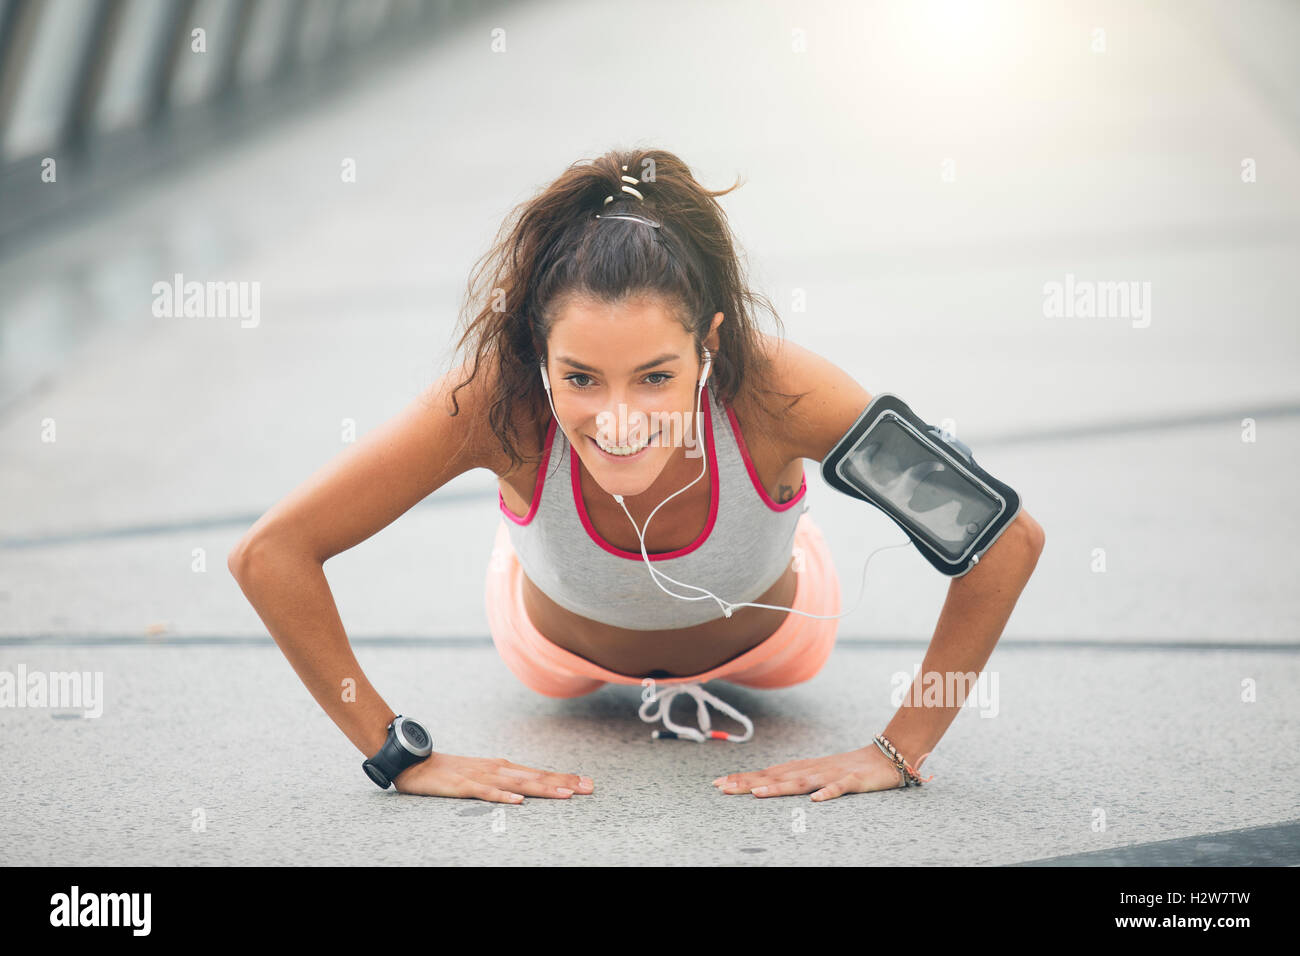 Portrait of a beautiful young woman doing push ups on the street Stock Photo